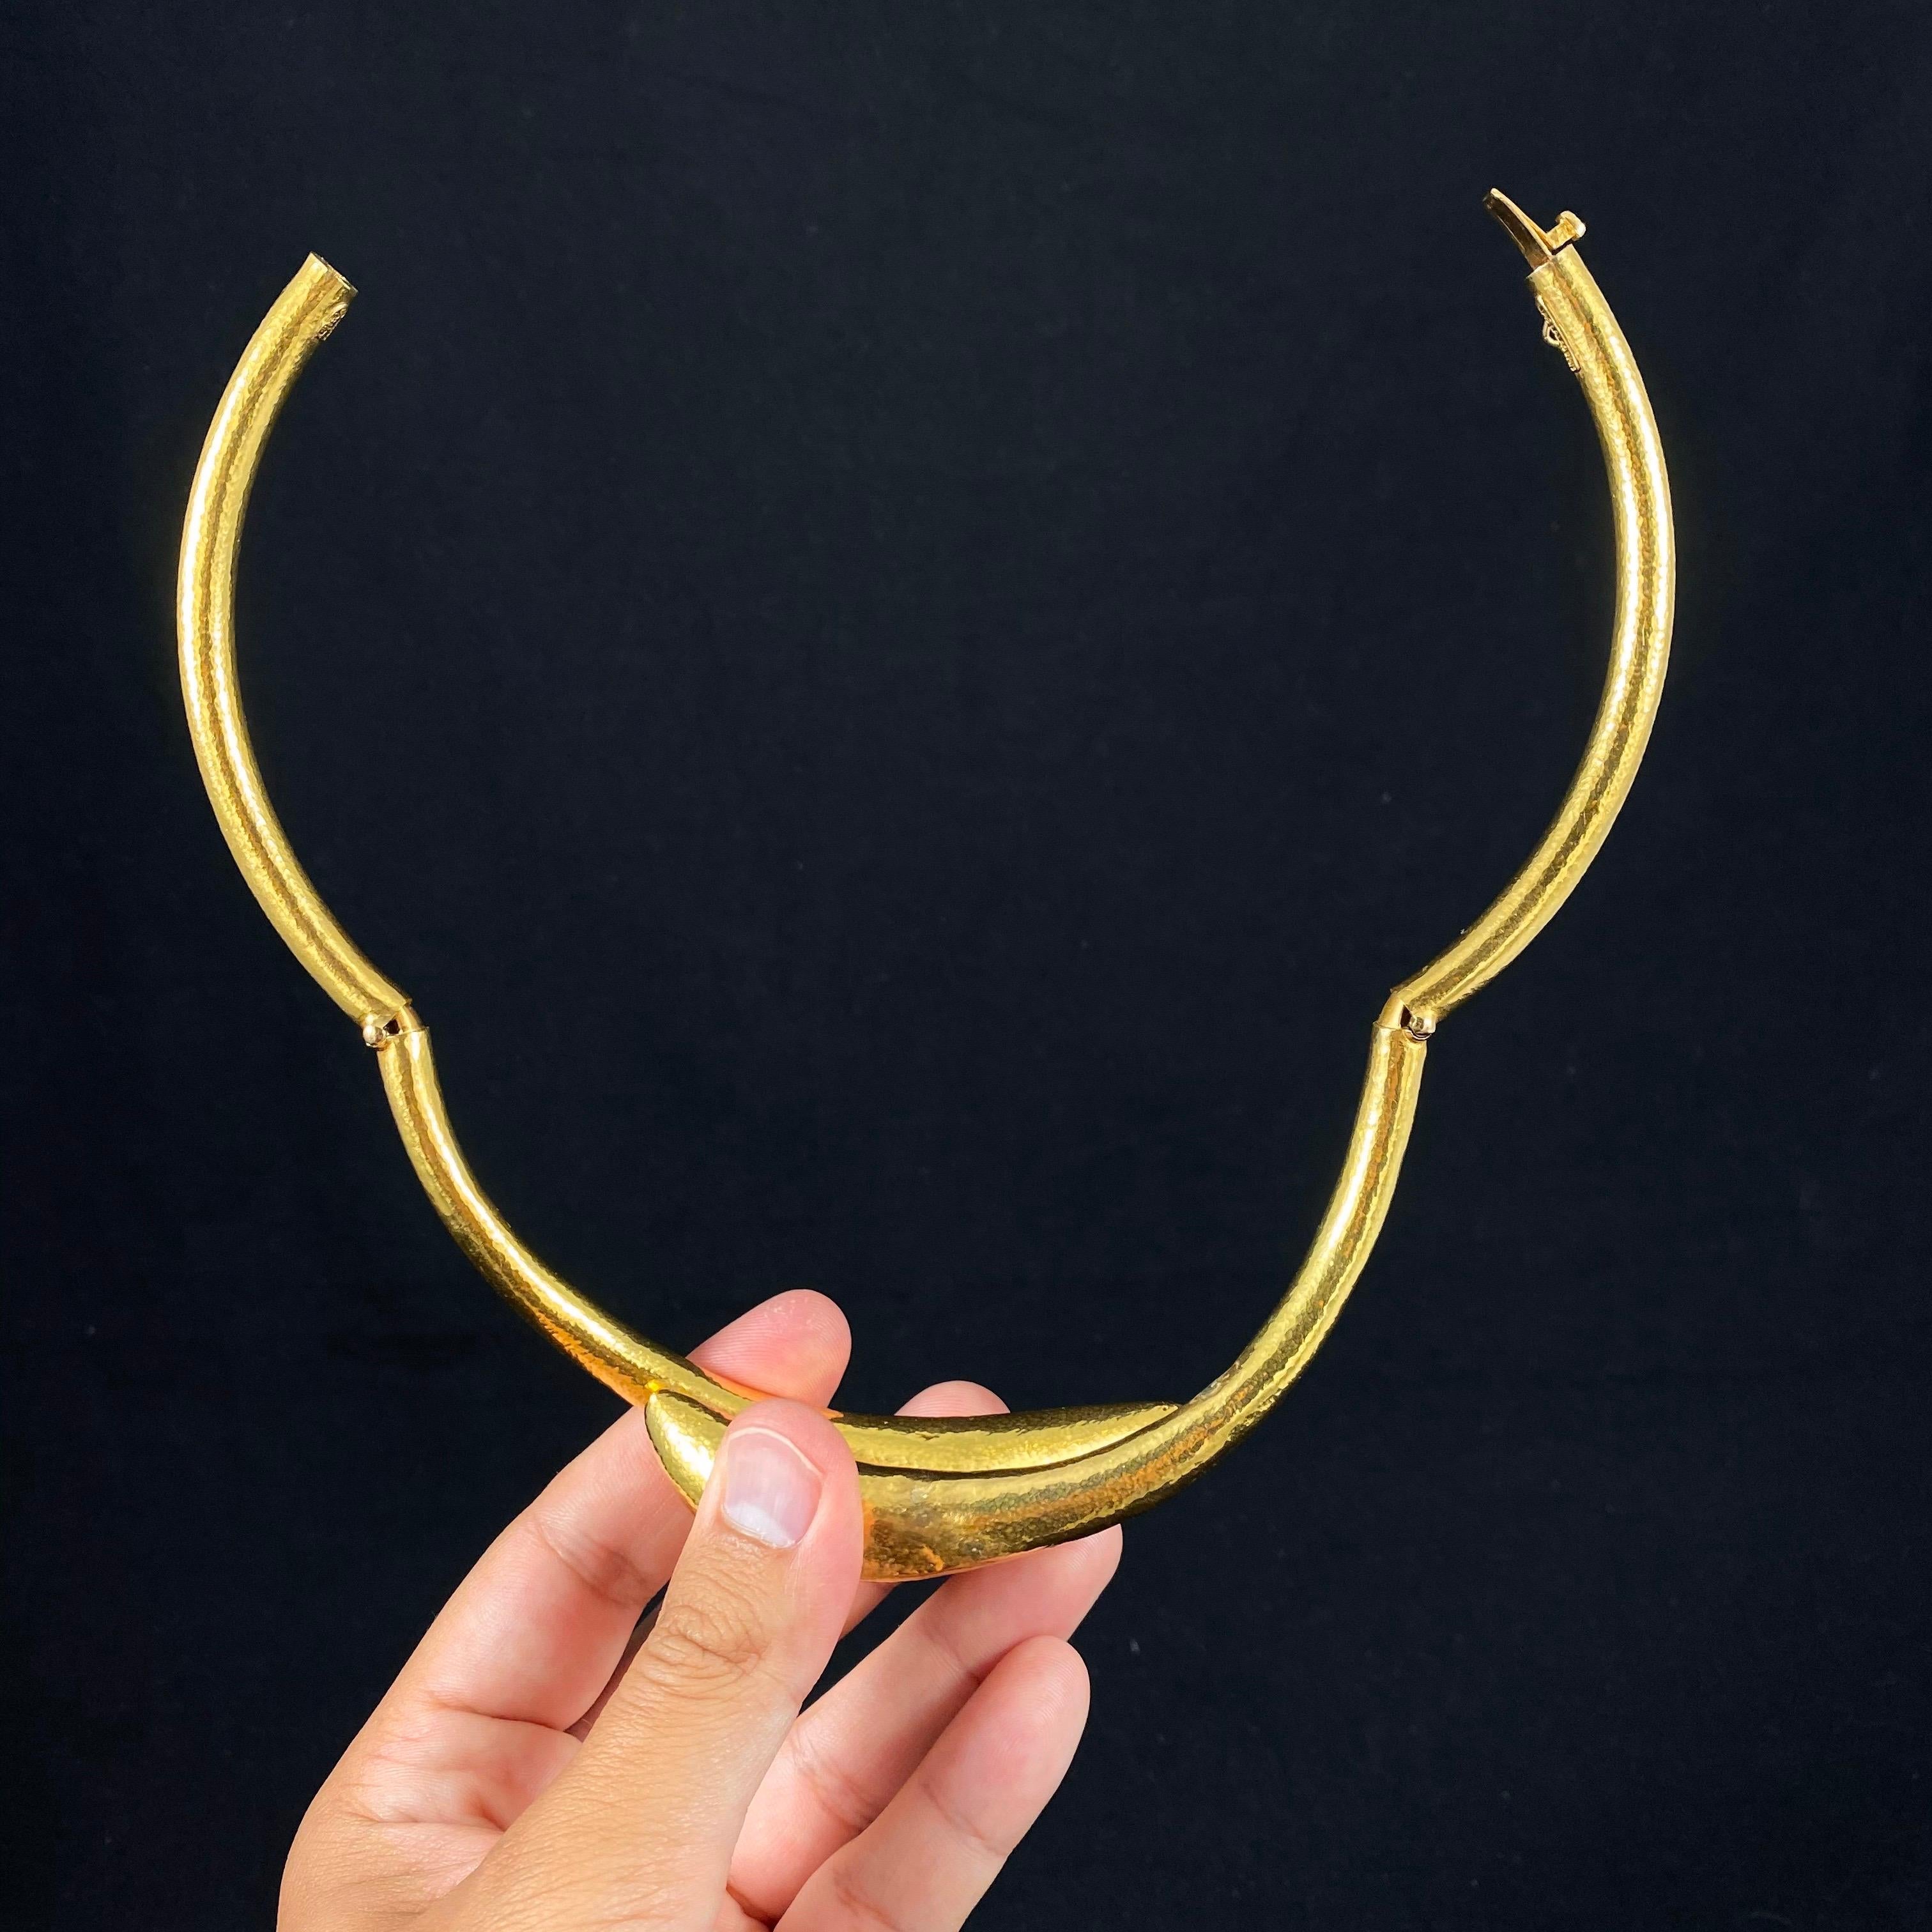 Lalaounis Vintage Hammered Yellow Gold Torque Serpents Choker Necklace, 1980s 6